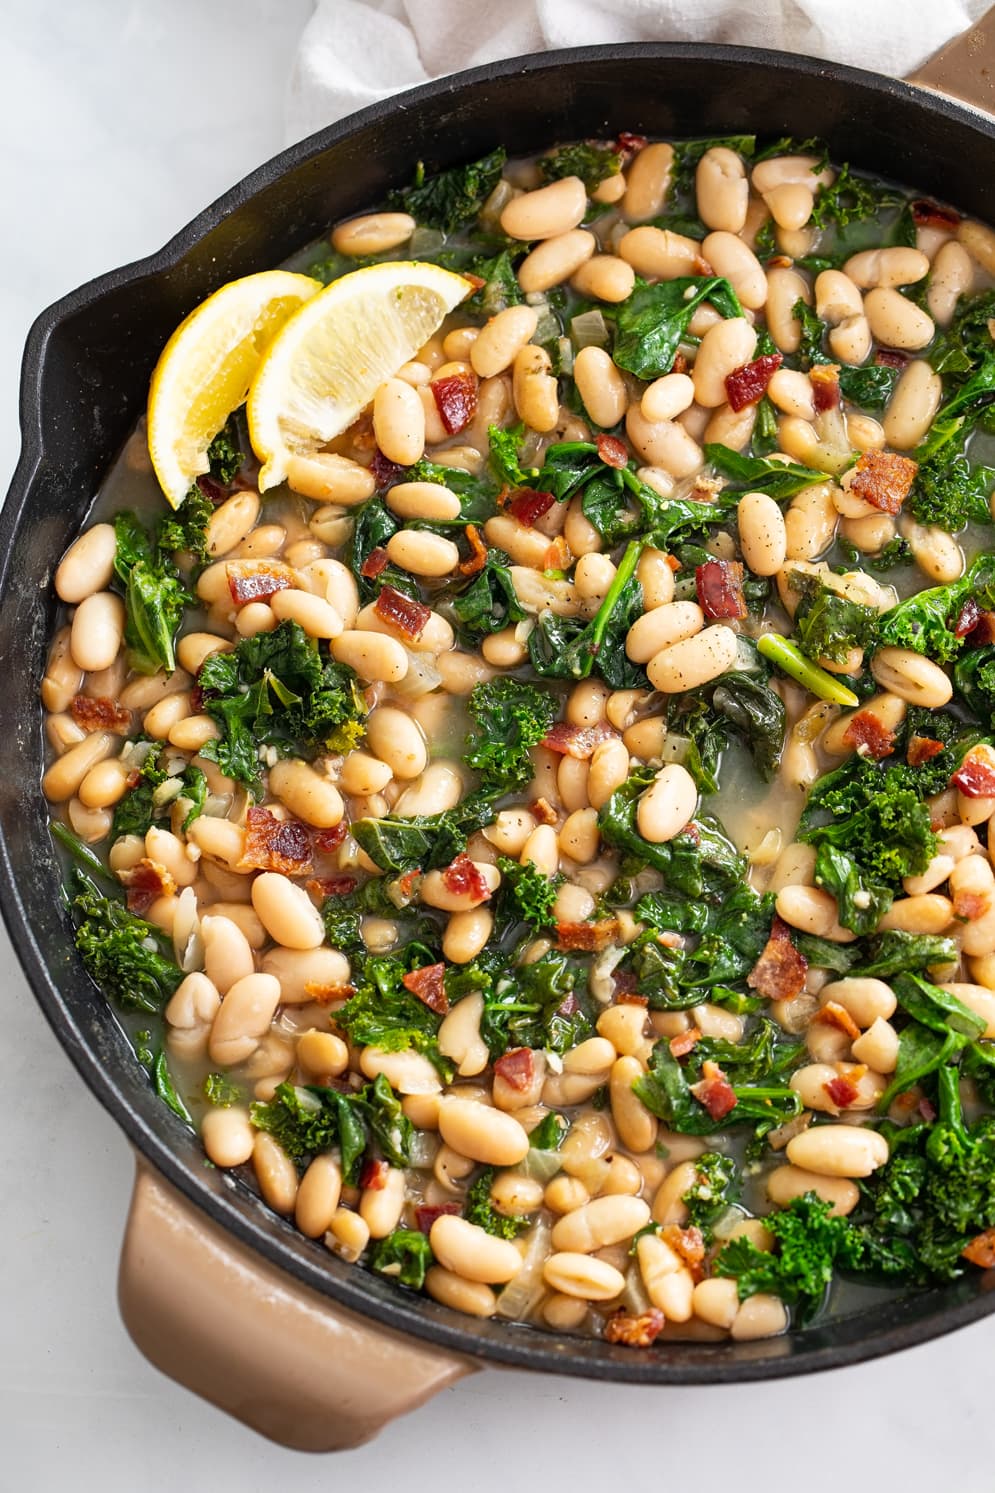 Greens and Beans in a skillet with bacon and freshly sliced lemon.